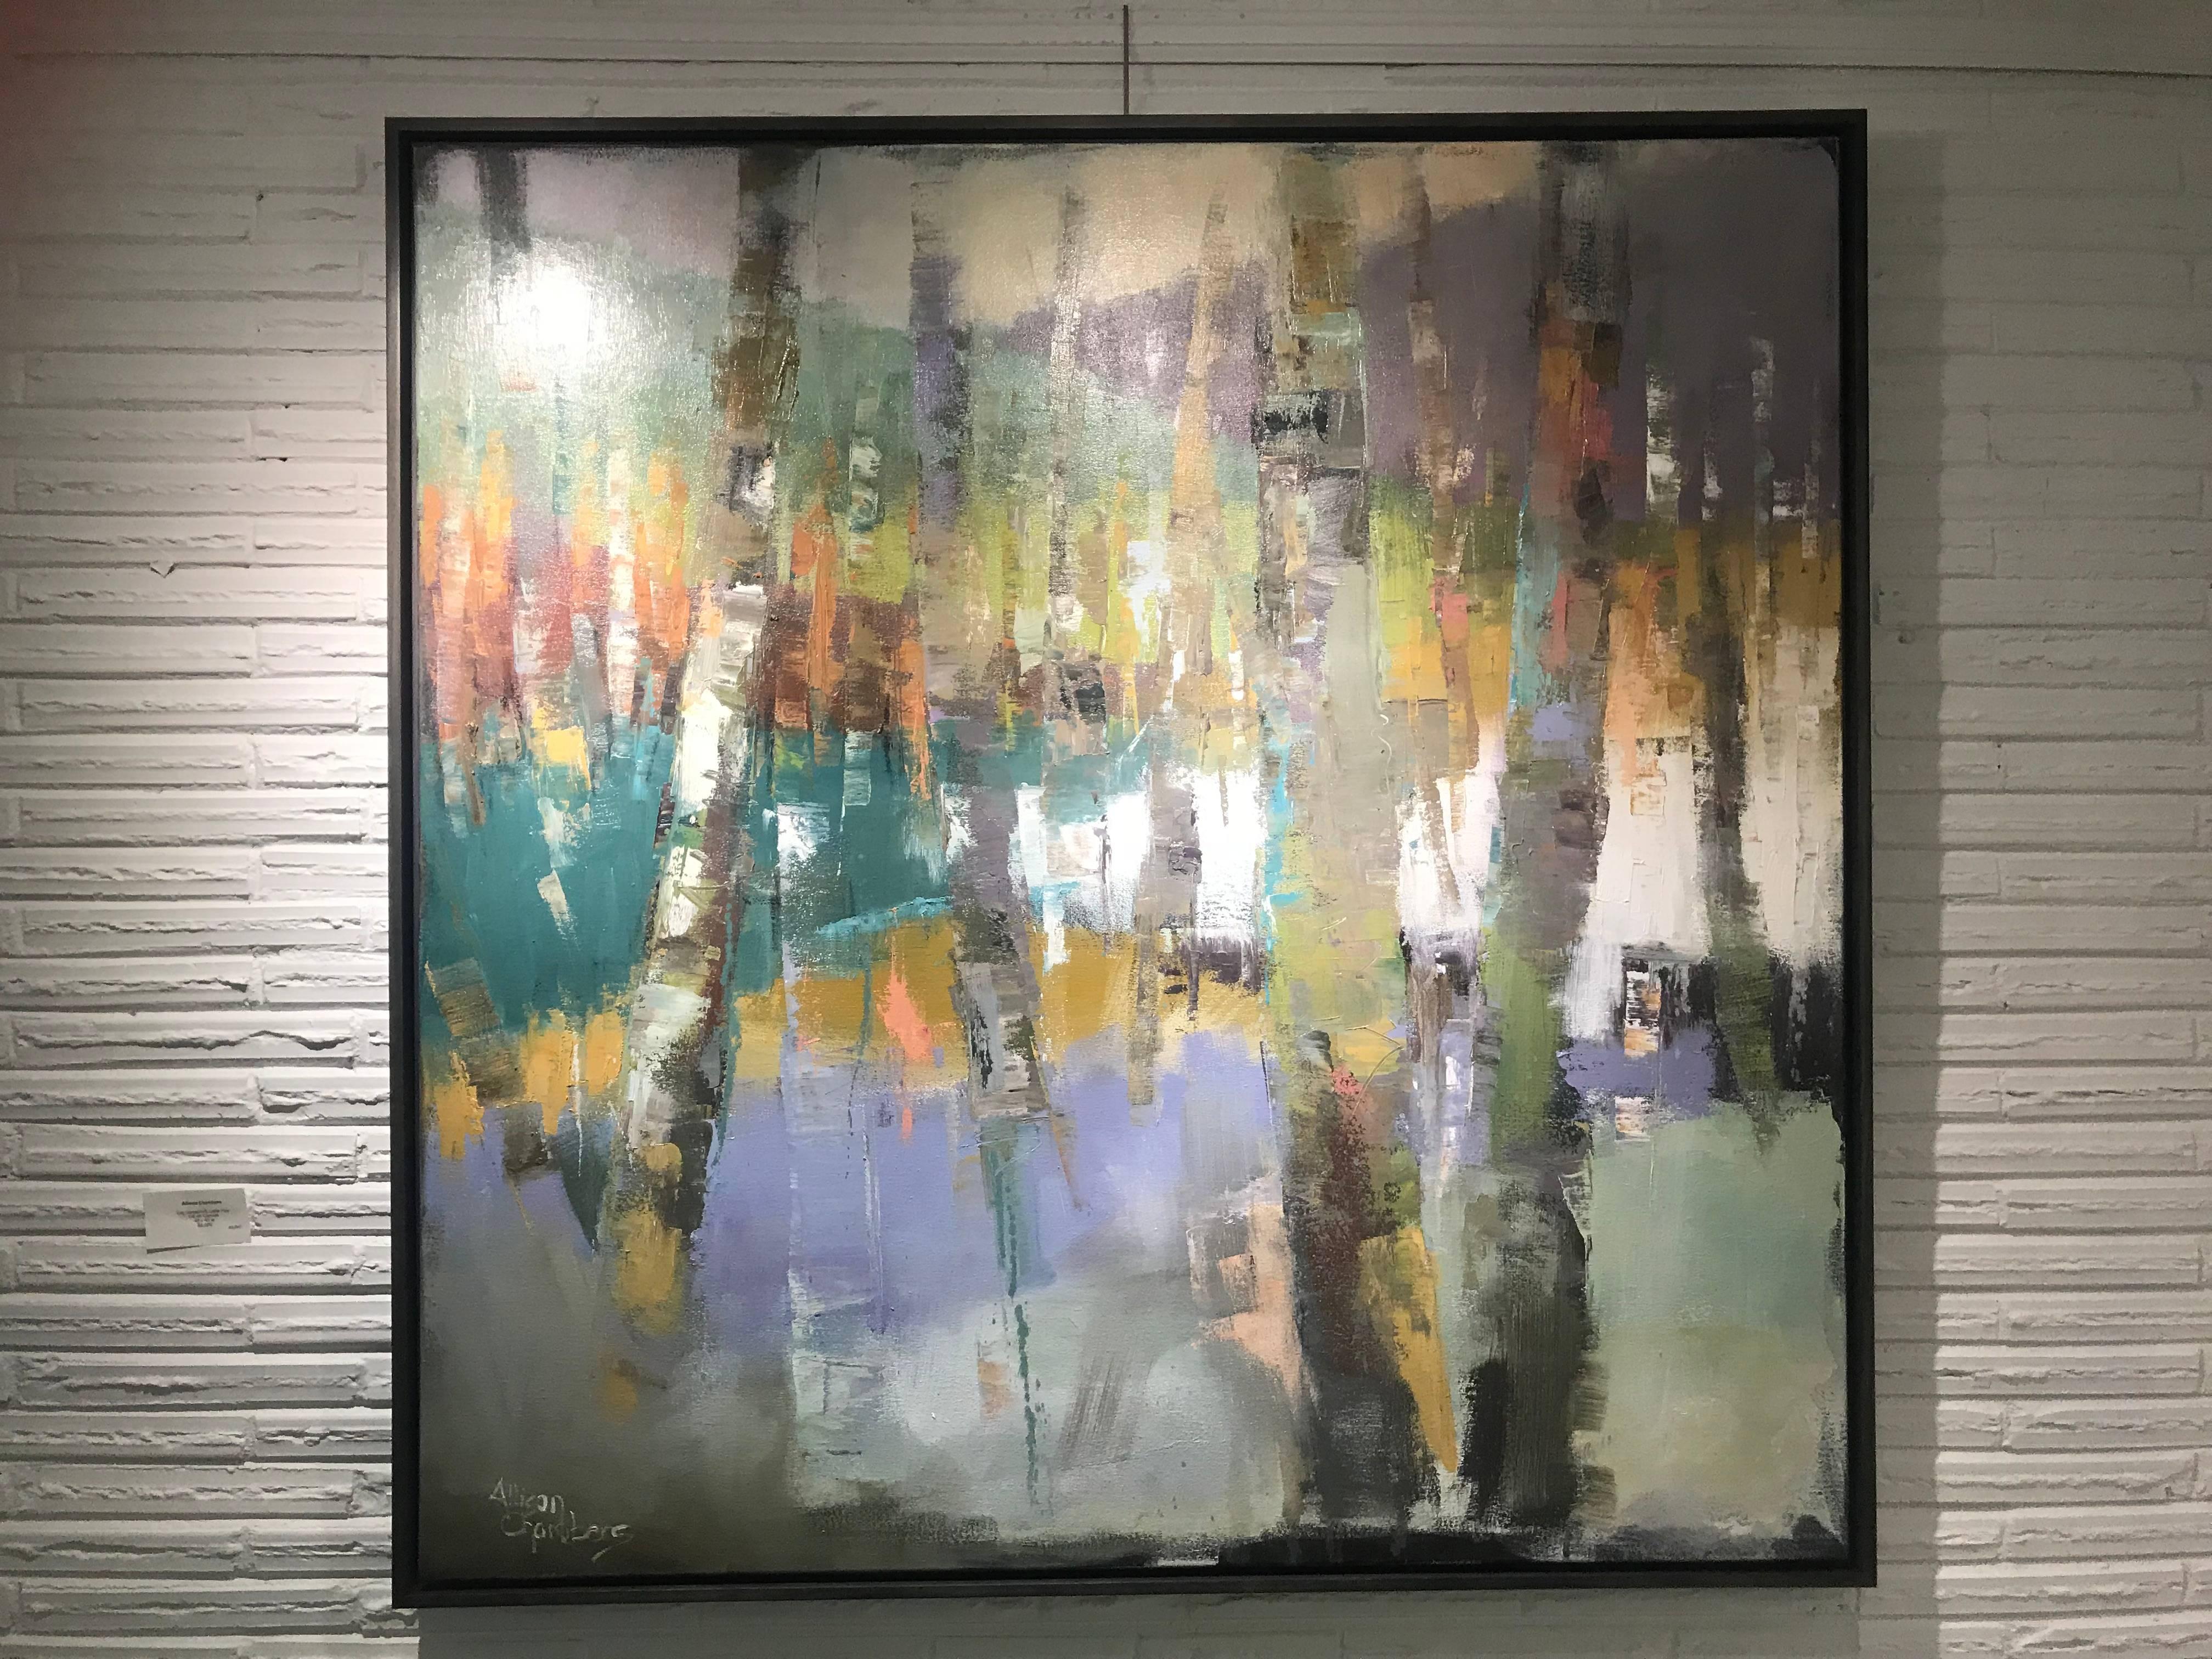 'Let Somebody Love You' is a large framed oil on canvas painting depicting an abstracted vision of a grouping of birch trees, created by American artist Allison Chambers in 2018. Featuring an exquisite palette made of colors such as teal, green,